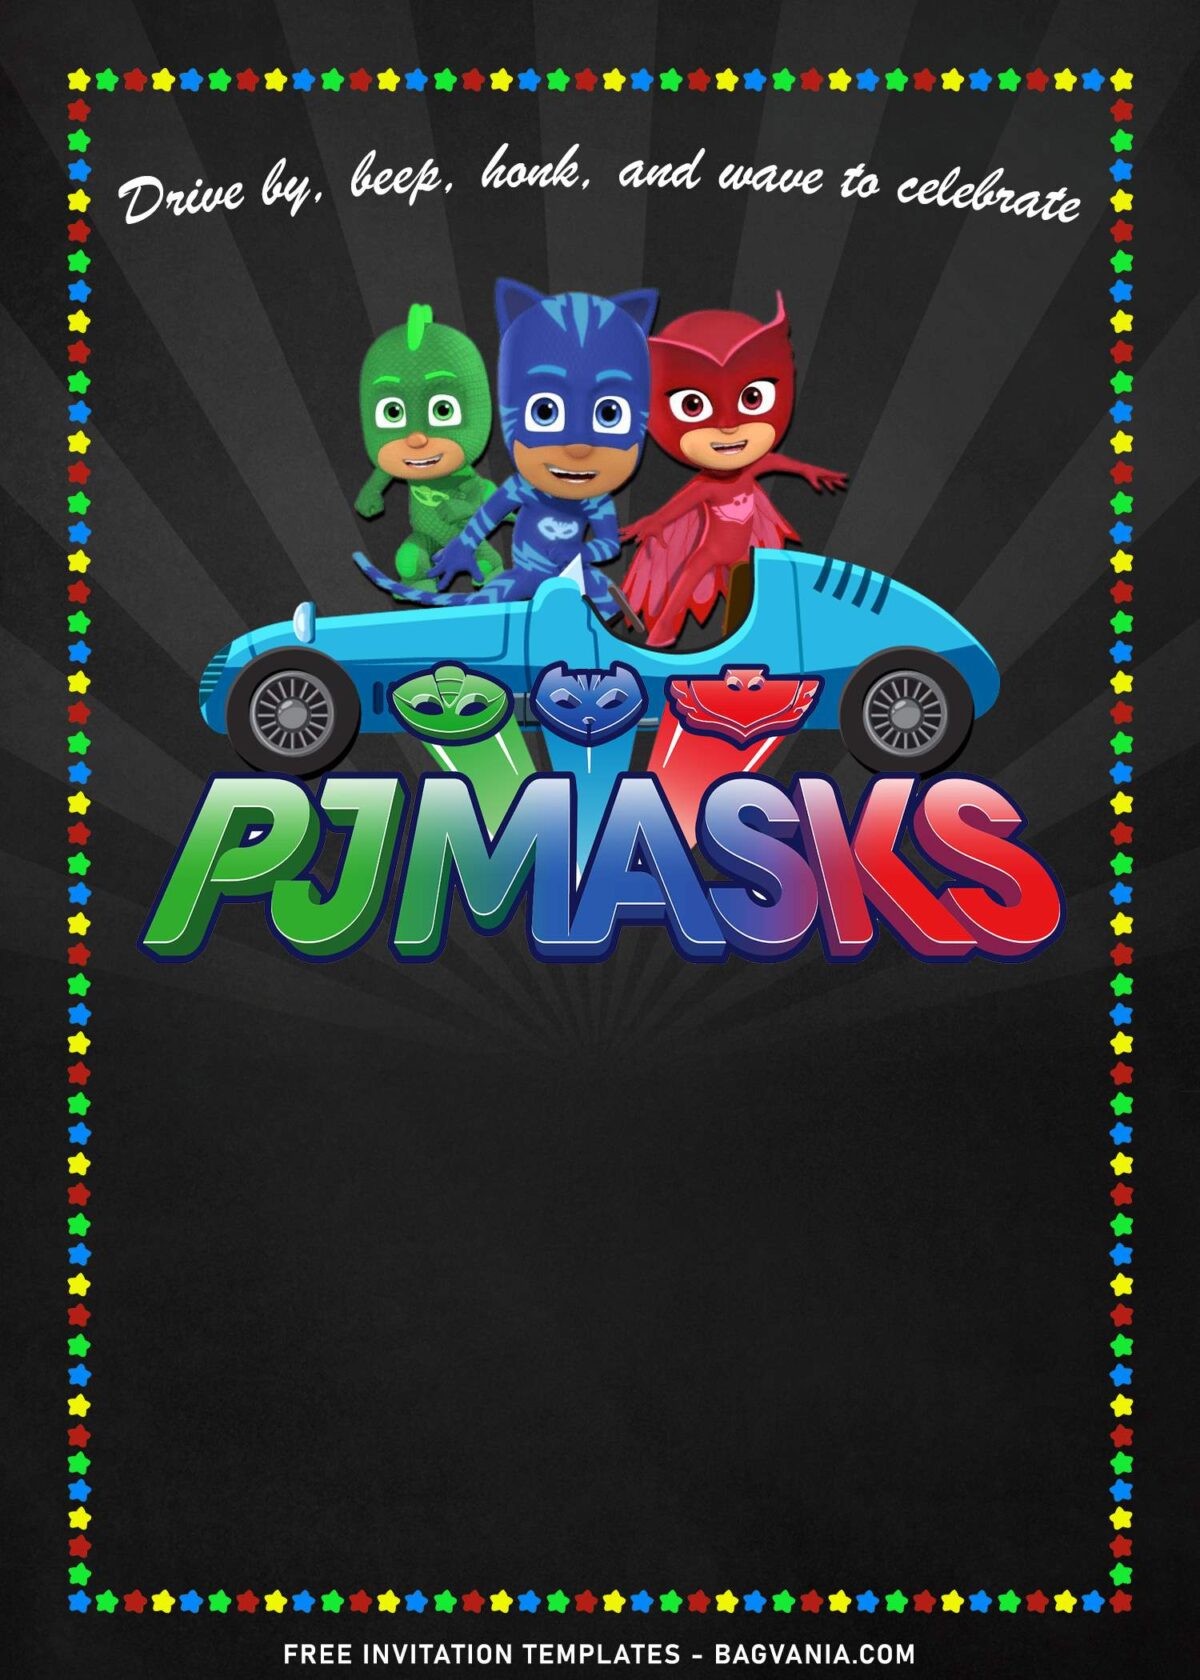 7+ Drive Honk And Wave PJ Masks Birthday Invitation Templates with chalkboard background